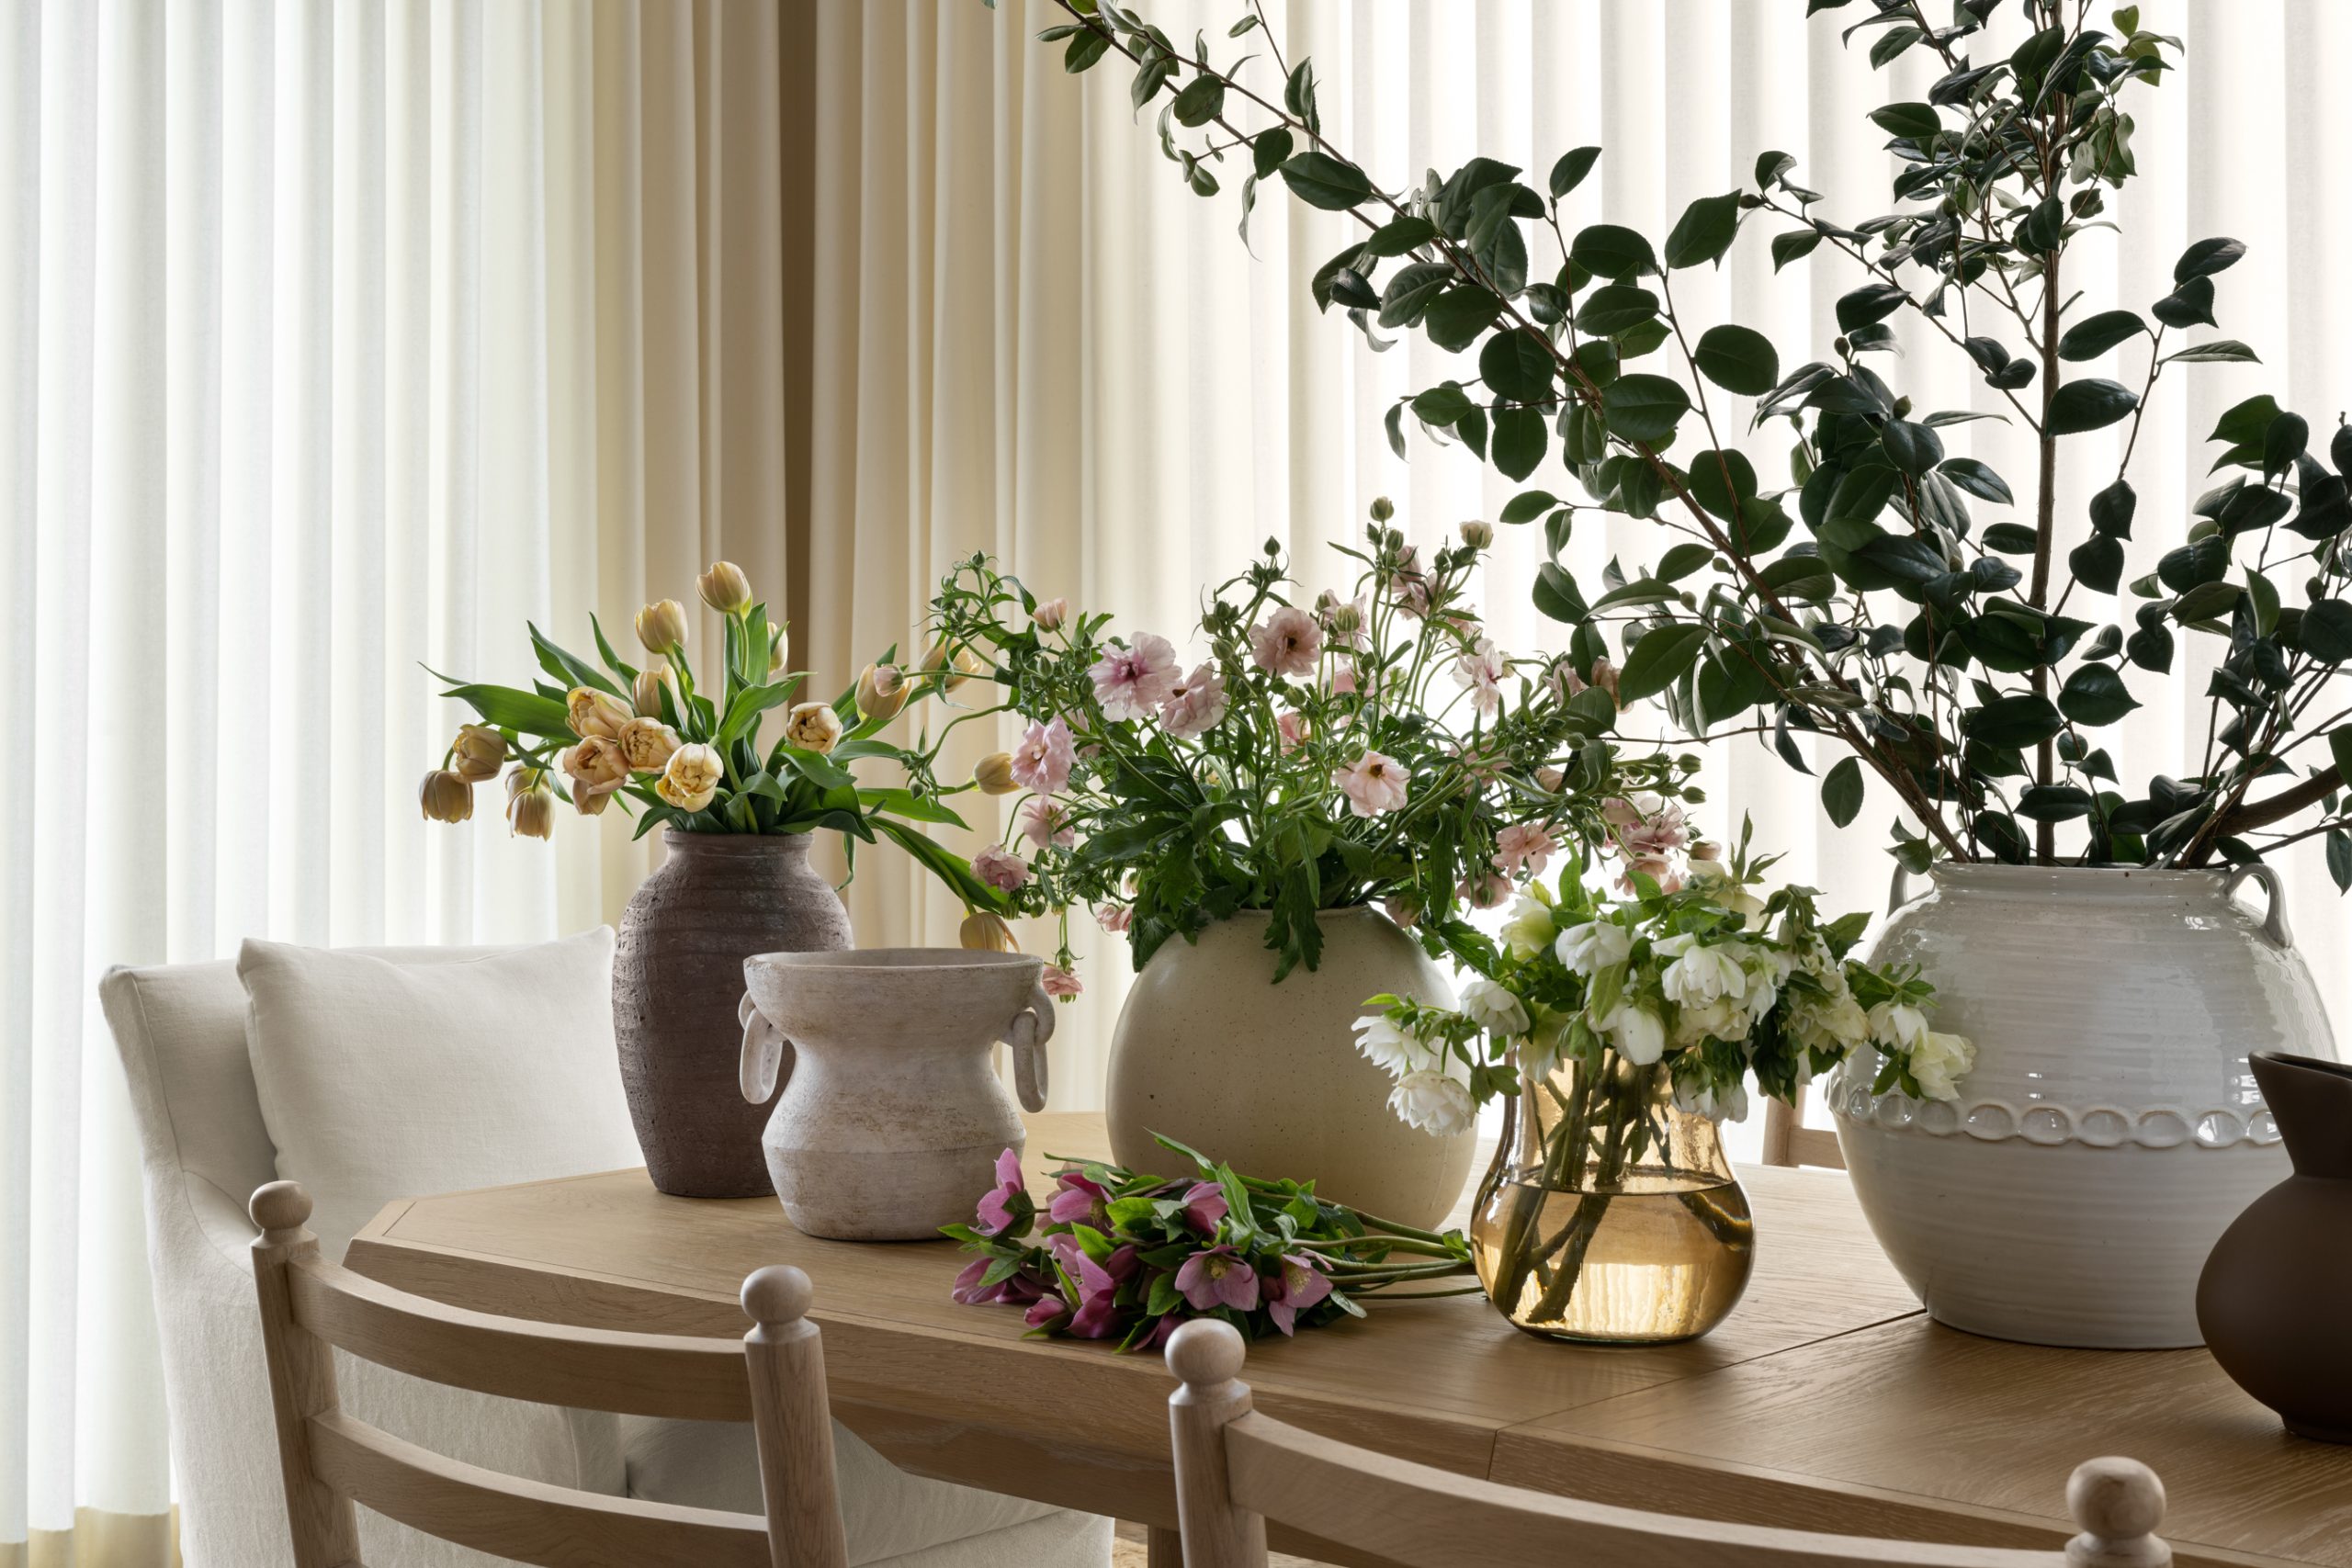 dining table with vases of flowers and greenery